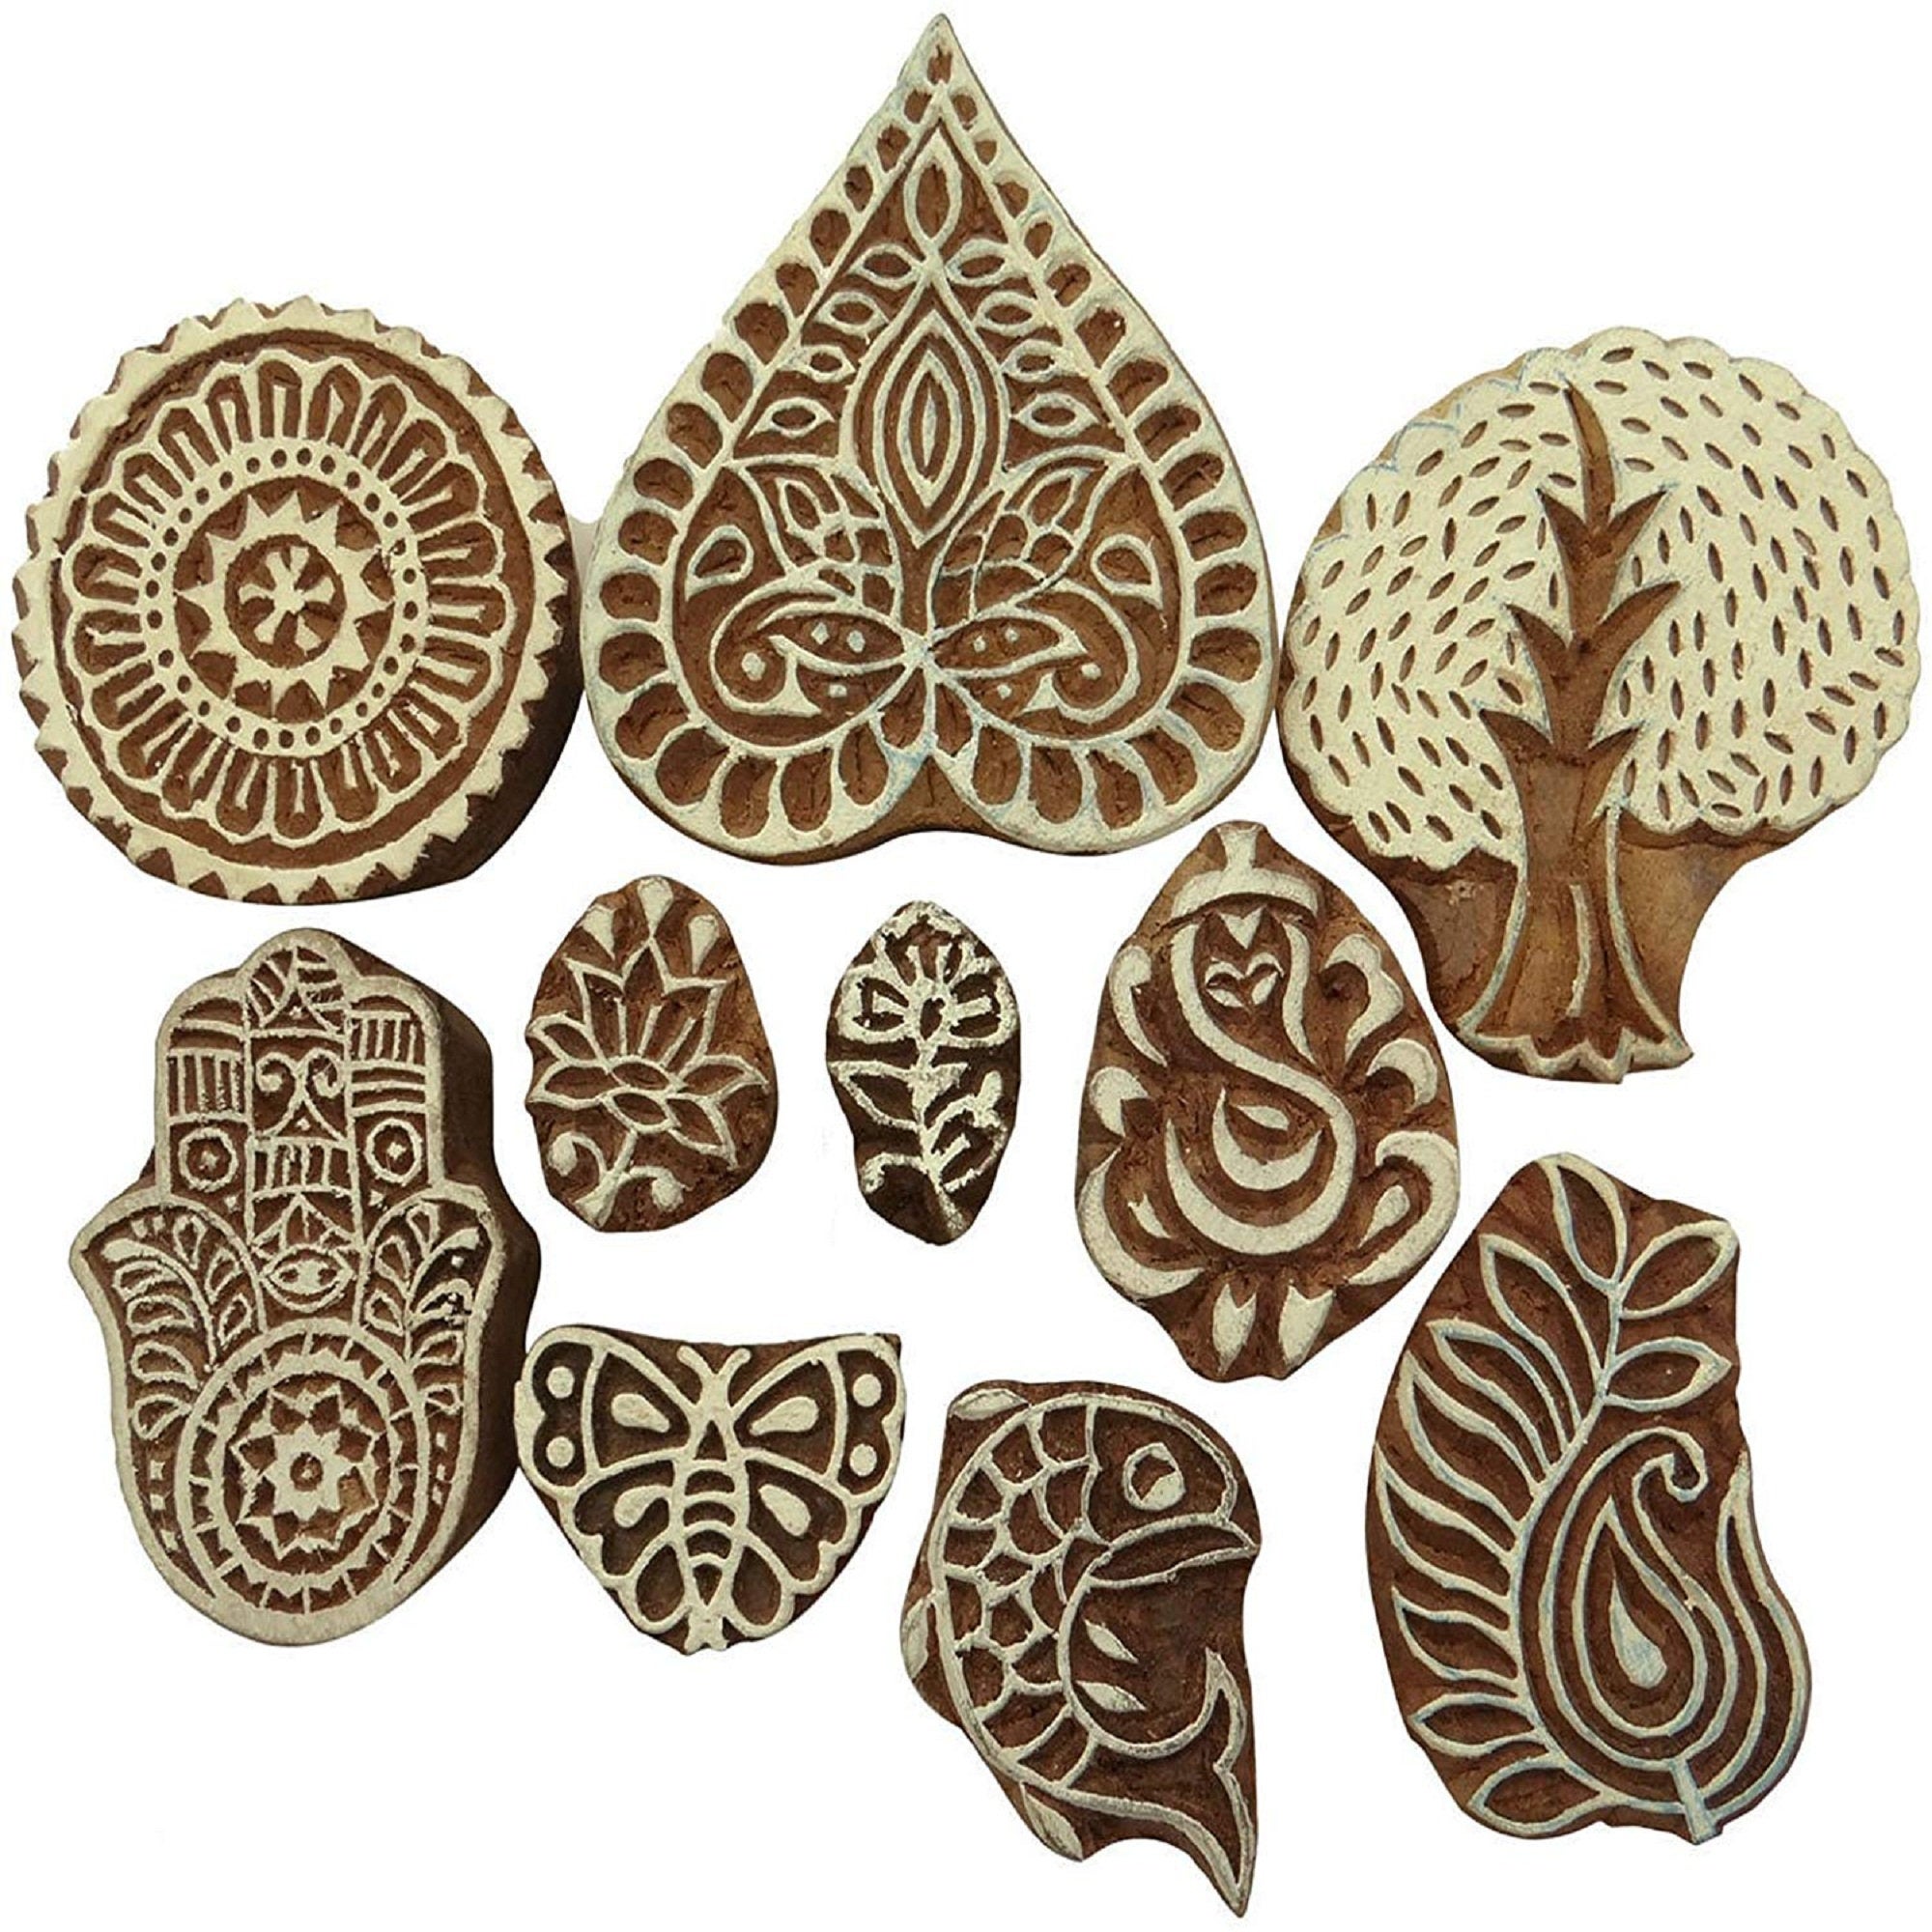 Decorative Wooden Stamps Textile Printing H Multi Max 42% OFF Blocks Discount is also underway Pattern